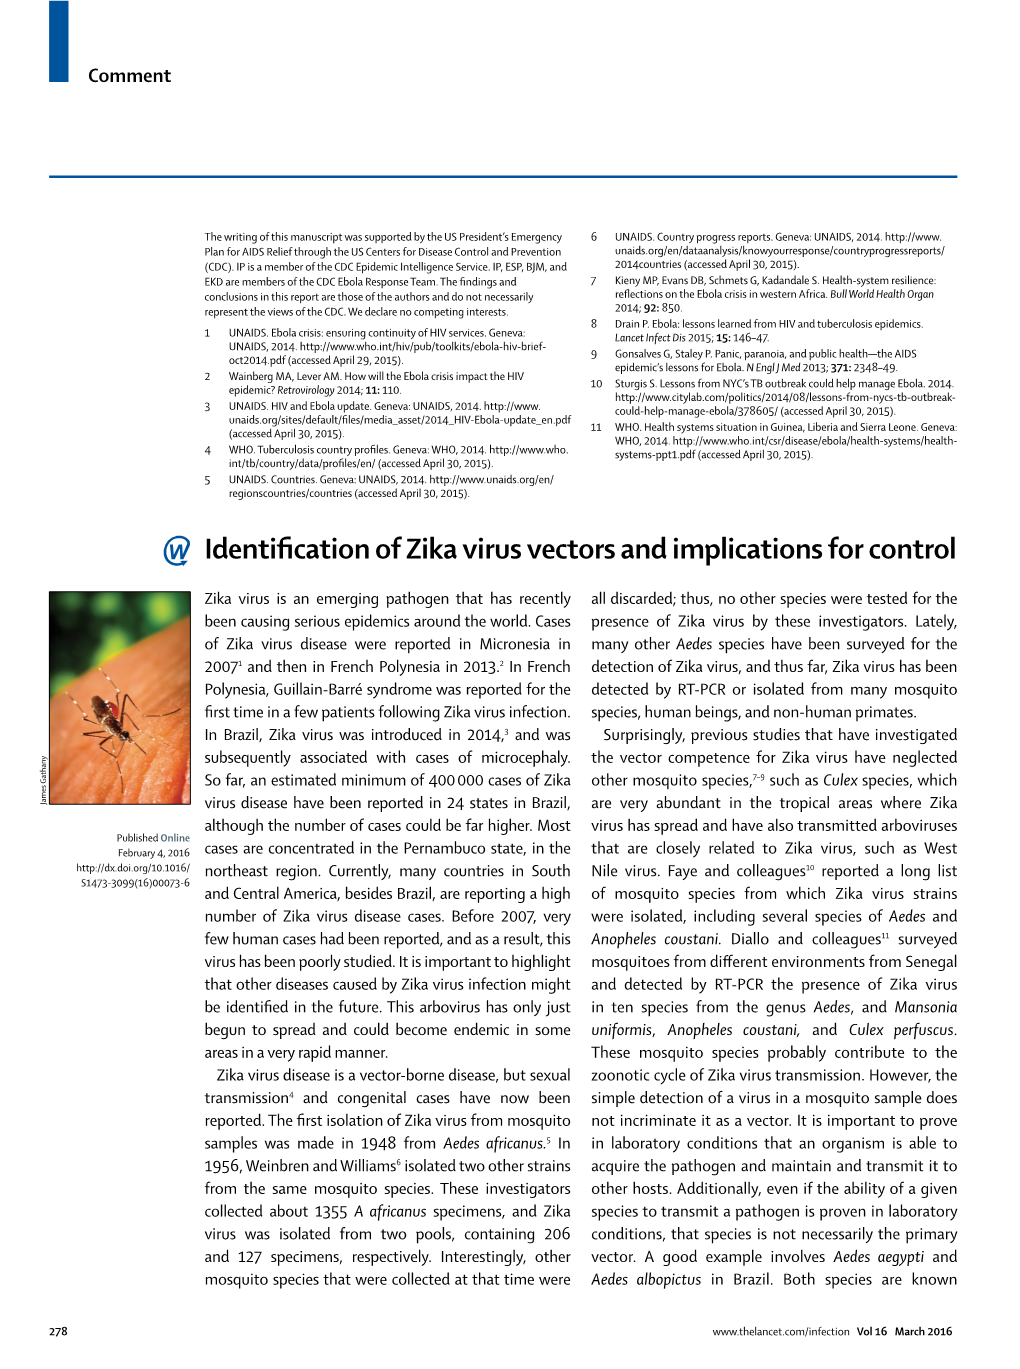 Identification of Zika Virus Vectors and Implications for Control